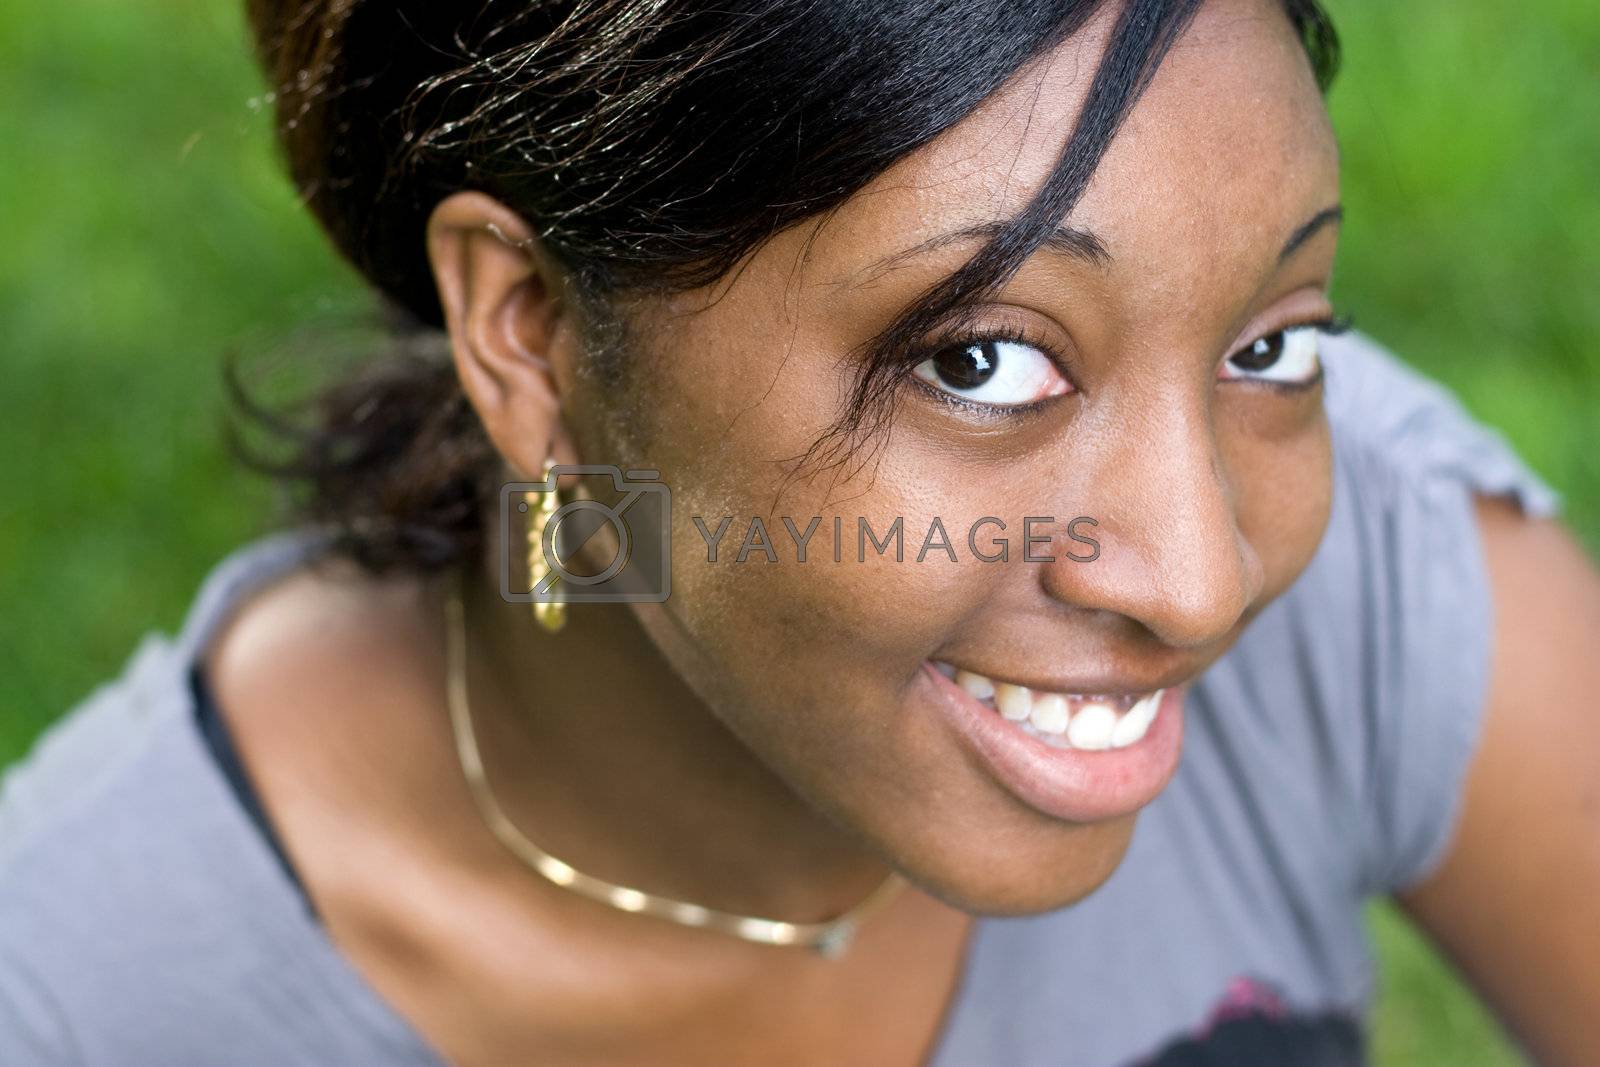 Royalty free image of Smiling Young Woman by graficallyminded